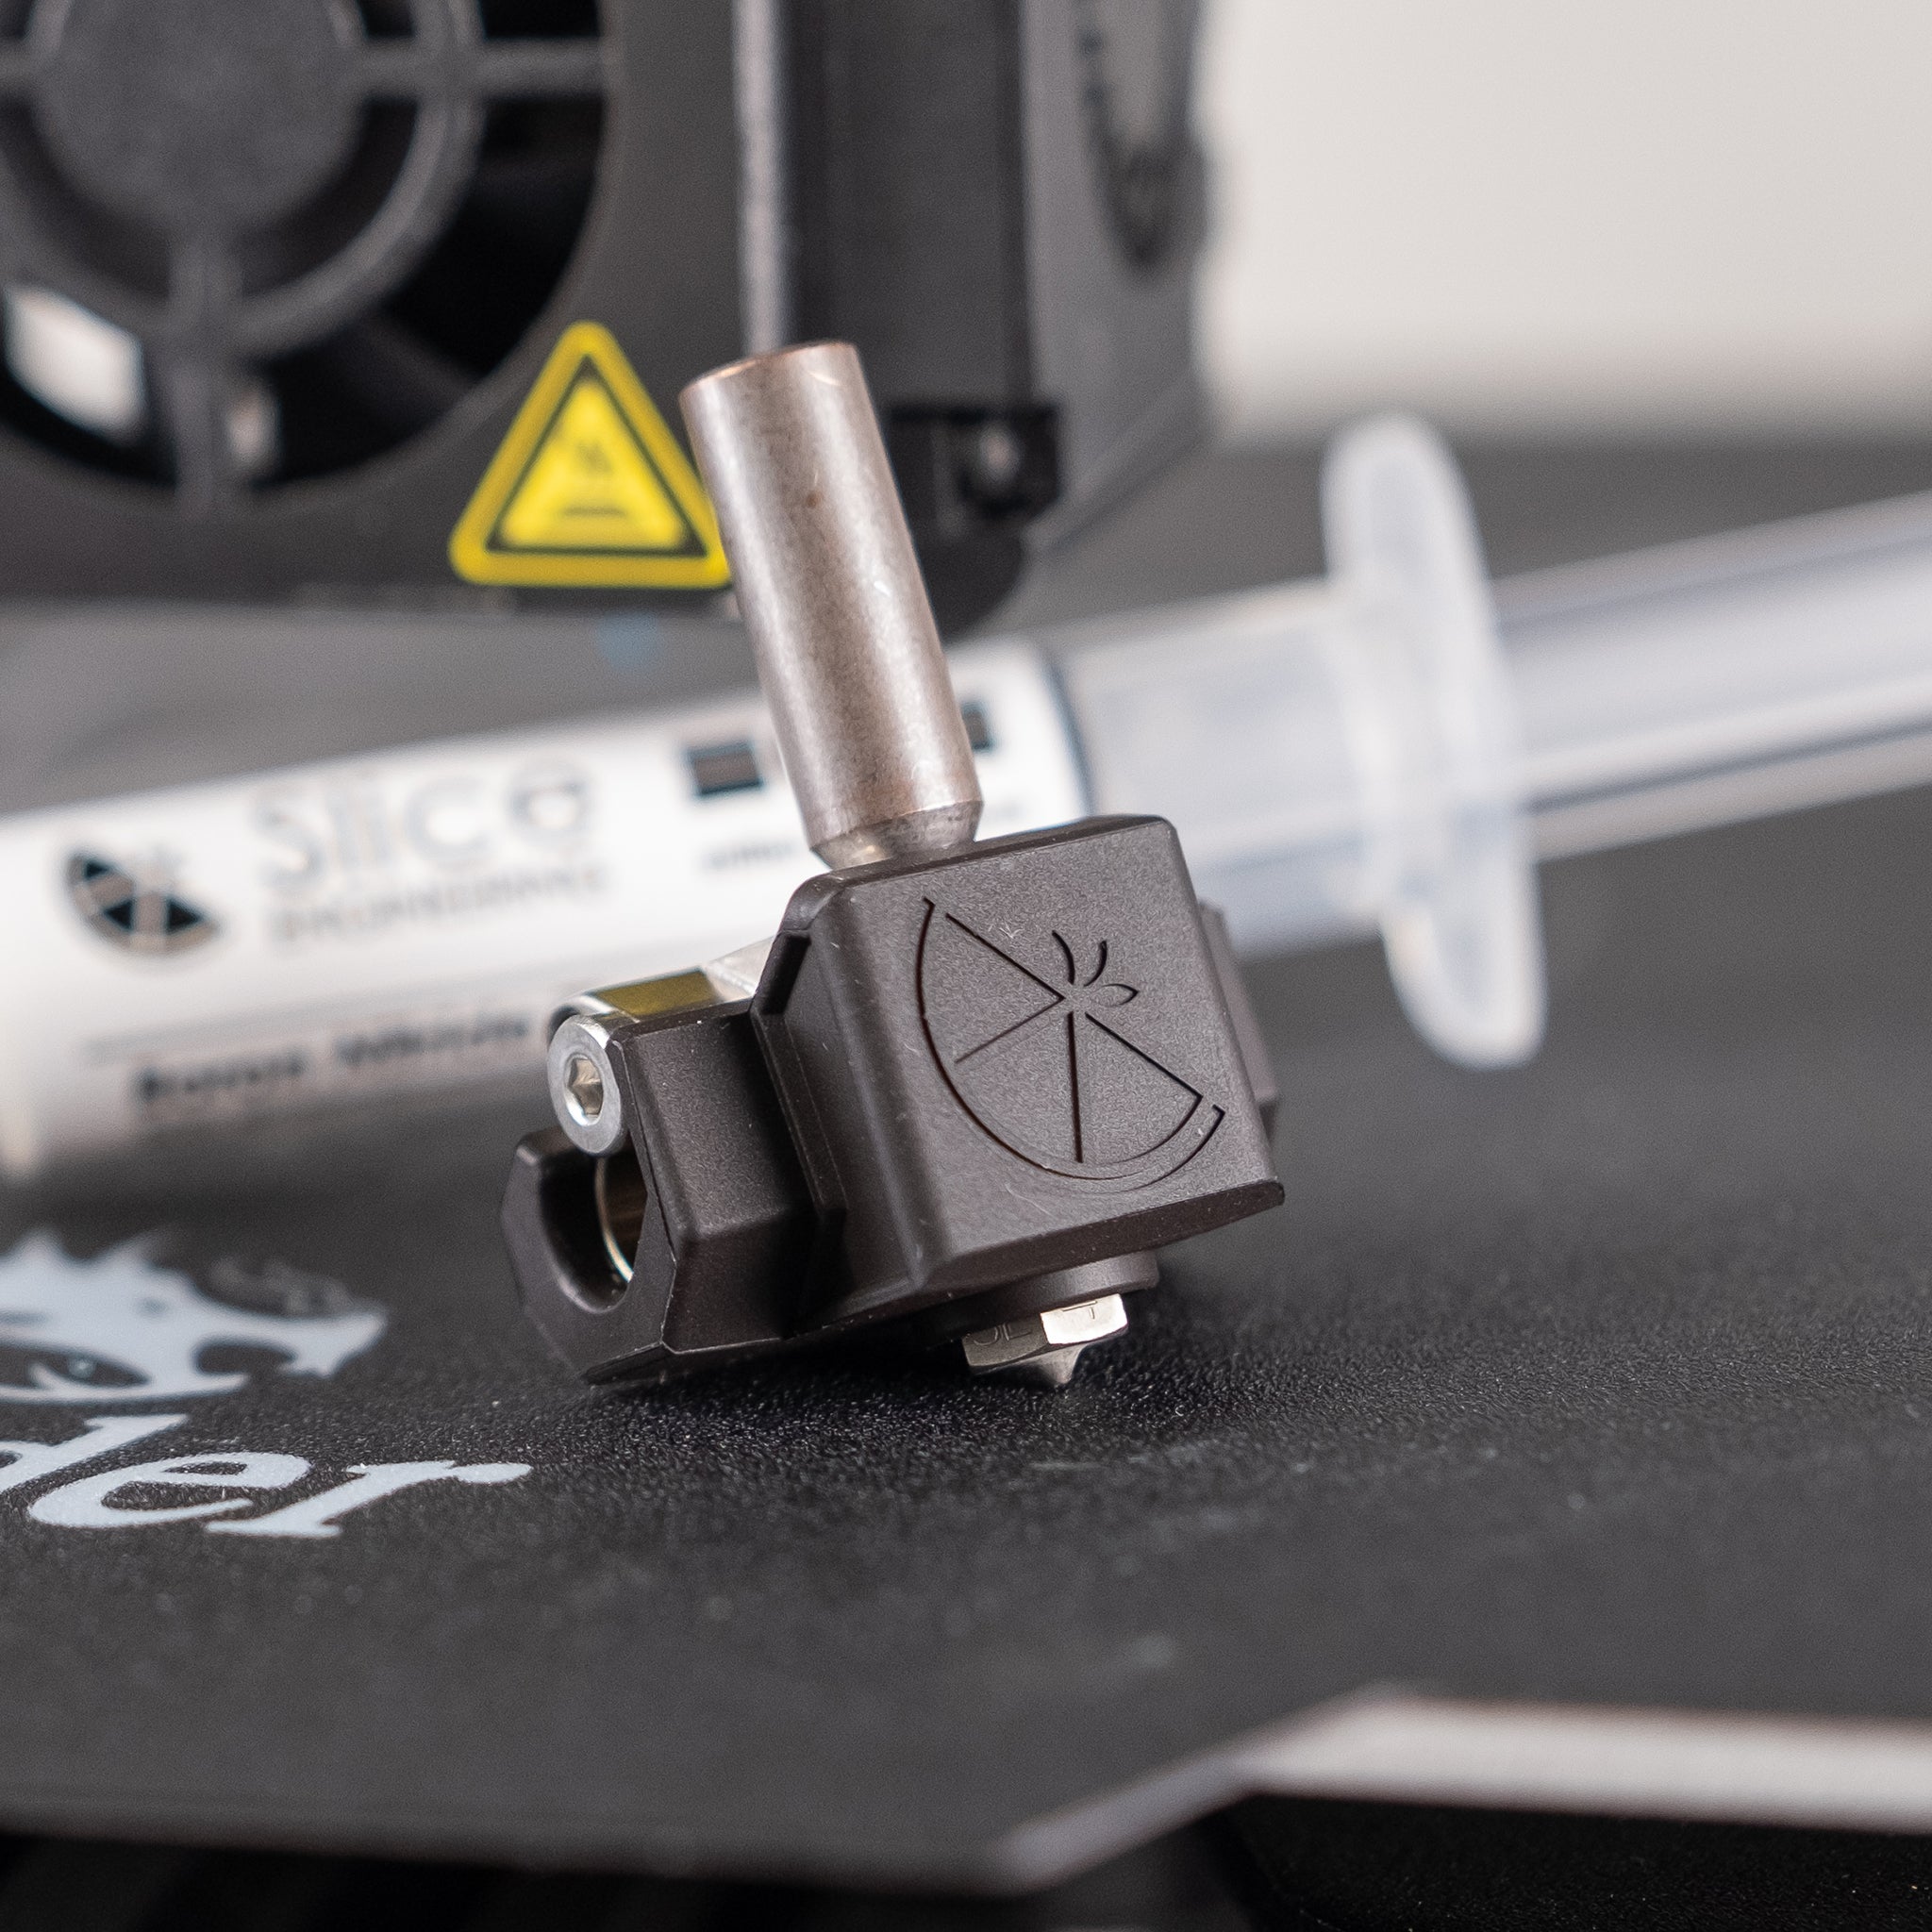 Upgrading Your 3D Printer: The Hotend Upgrade 